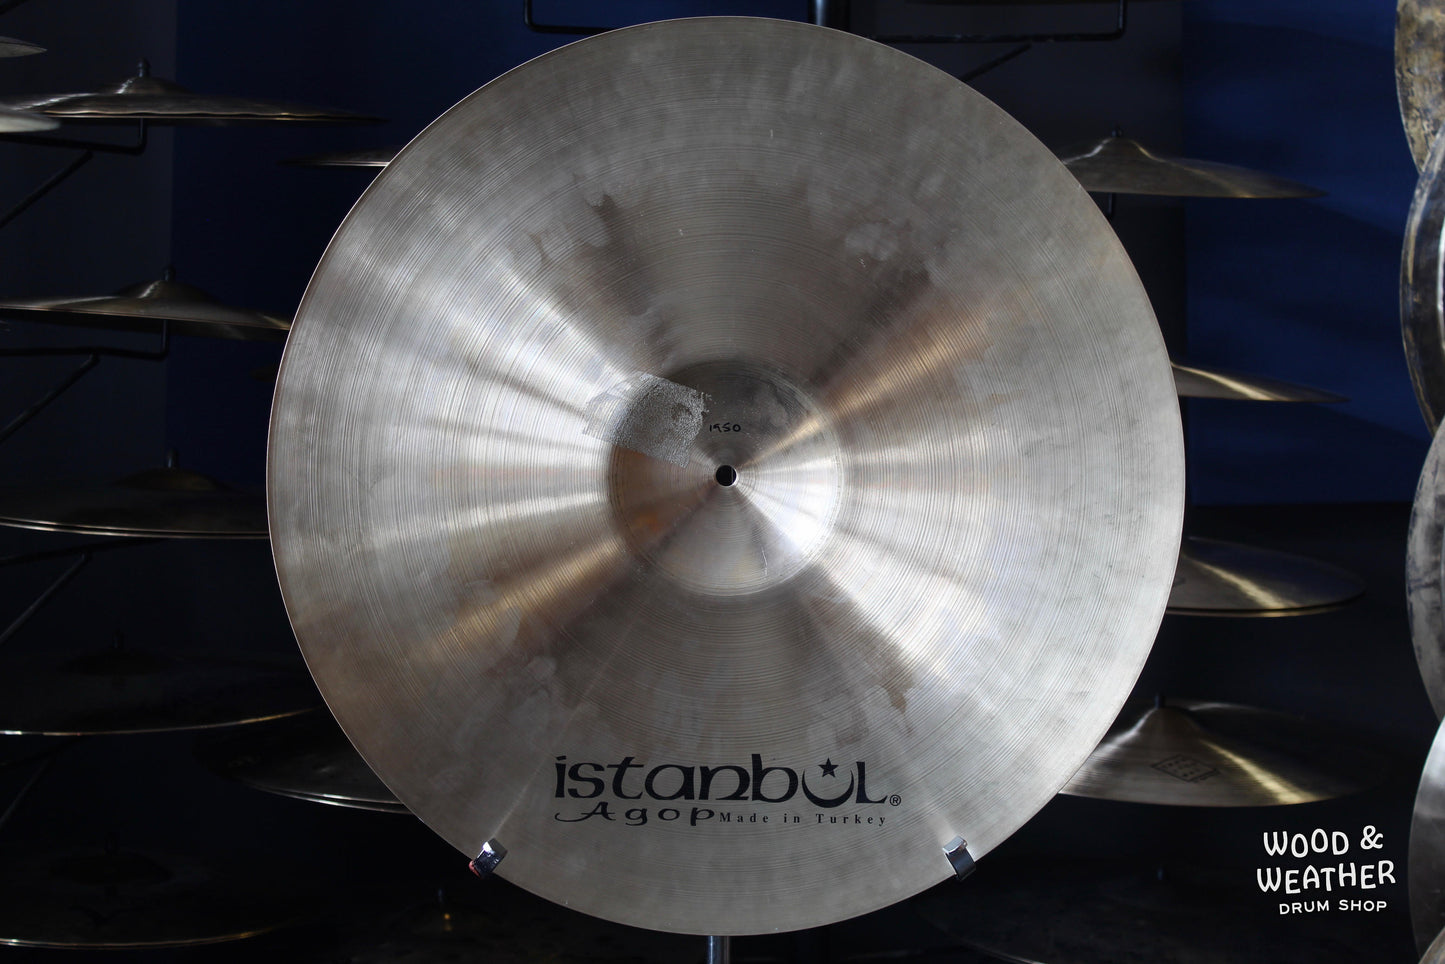 Used Istanbul Agop 22" Xist Ride Cymbal 1950g